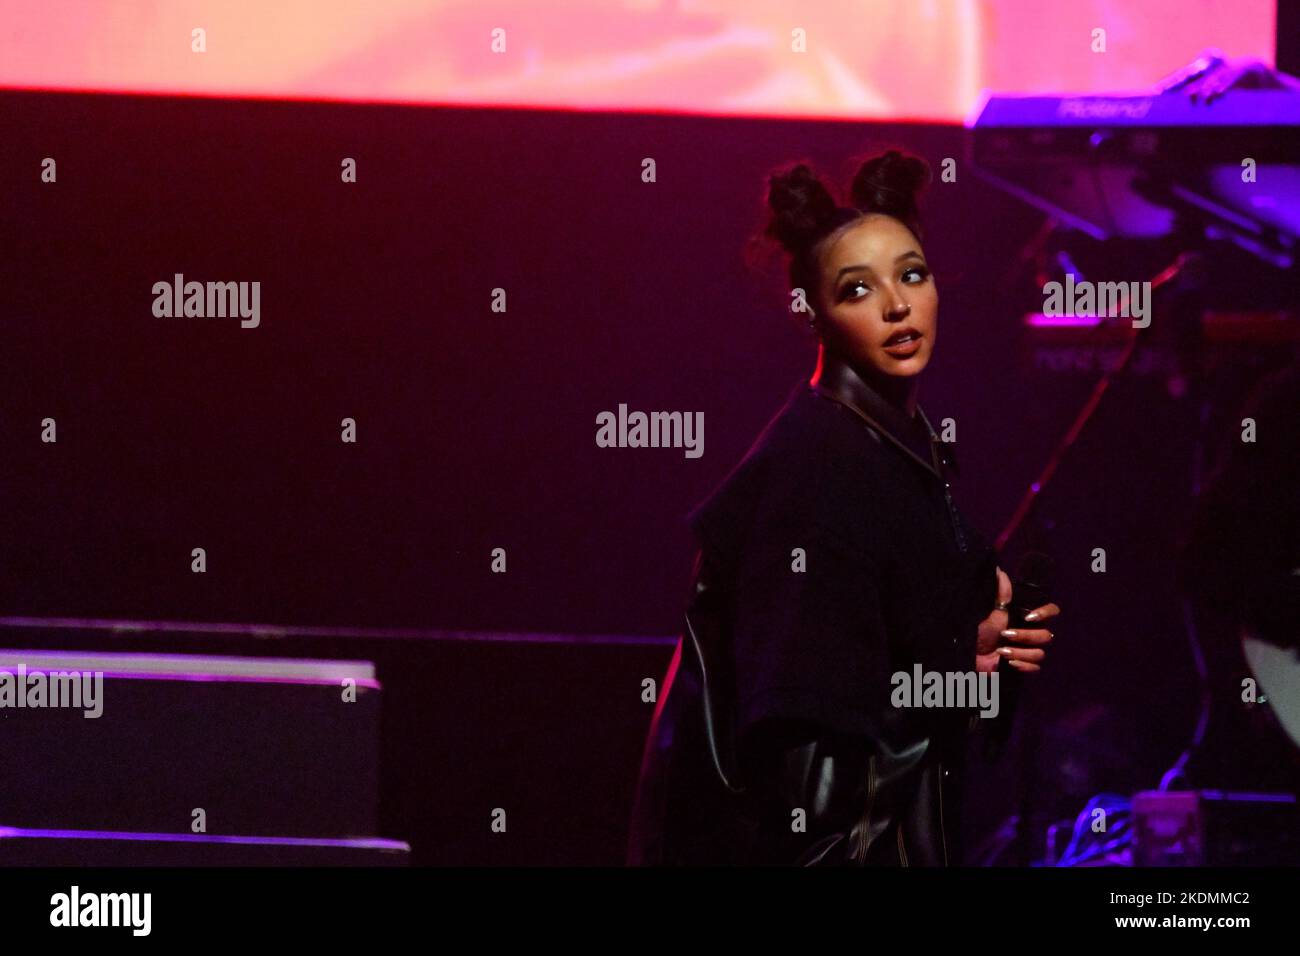 Philadelphia, United States. 06th Nov, 2022. U.S. singer Tinashe performs on stage during a Our Future is Now pre-election rally at Franklin Music Hall, in Philadelphia, PA, USA on November 6, 2022. Featuring U.S. Senator Bernie Sanders the event is held two days before the 2022 Midterm elections and co-hosted by NextGen America, MoveOn Political Action, and the Working Families Party. Credit: OOgImages/Alamy Live News Stock Photo